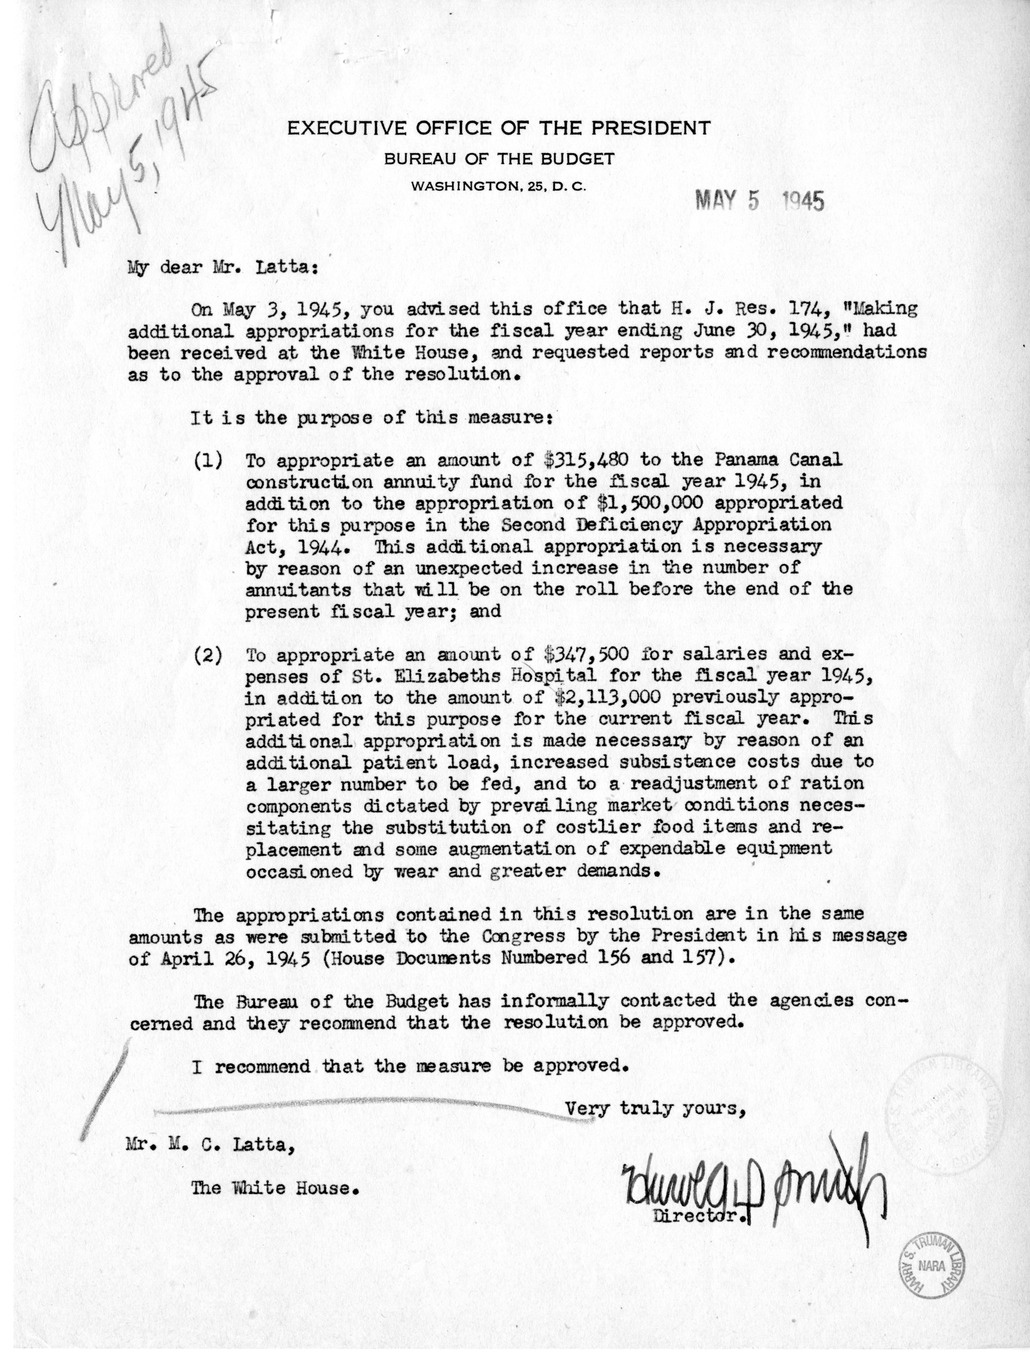 Memorandum from Harold D. Smith to M. C. Latta, H.J. Res. 174, Making Additional Appropriations for the Fiscal Year Ending June 30, 1945, with Attachments